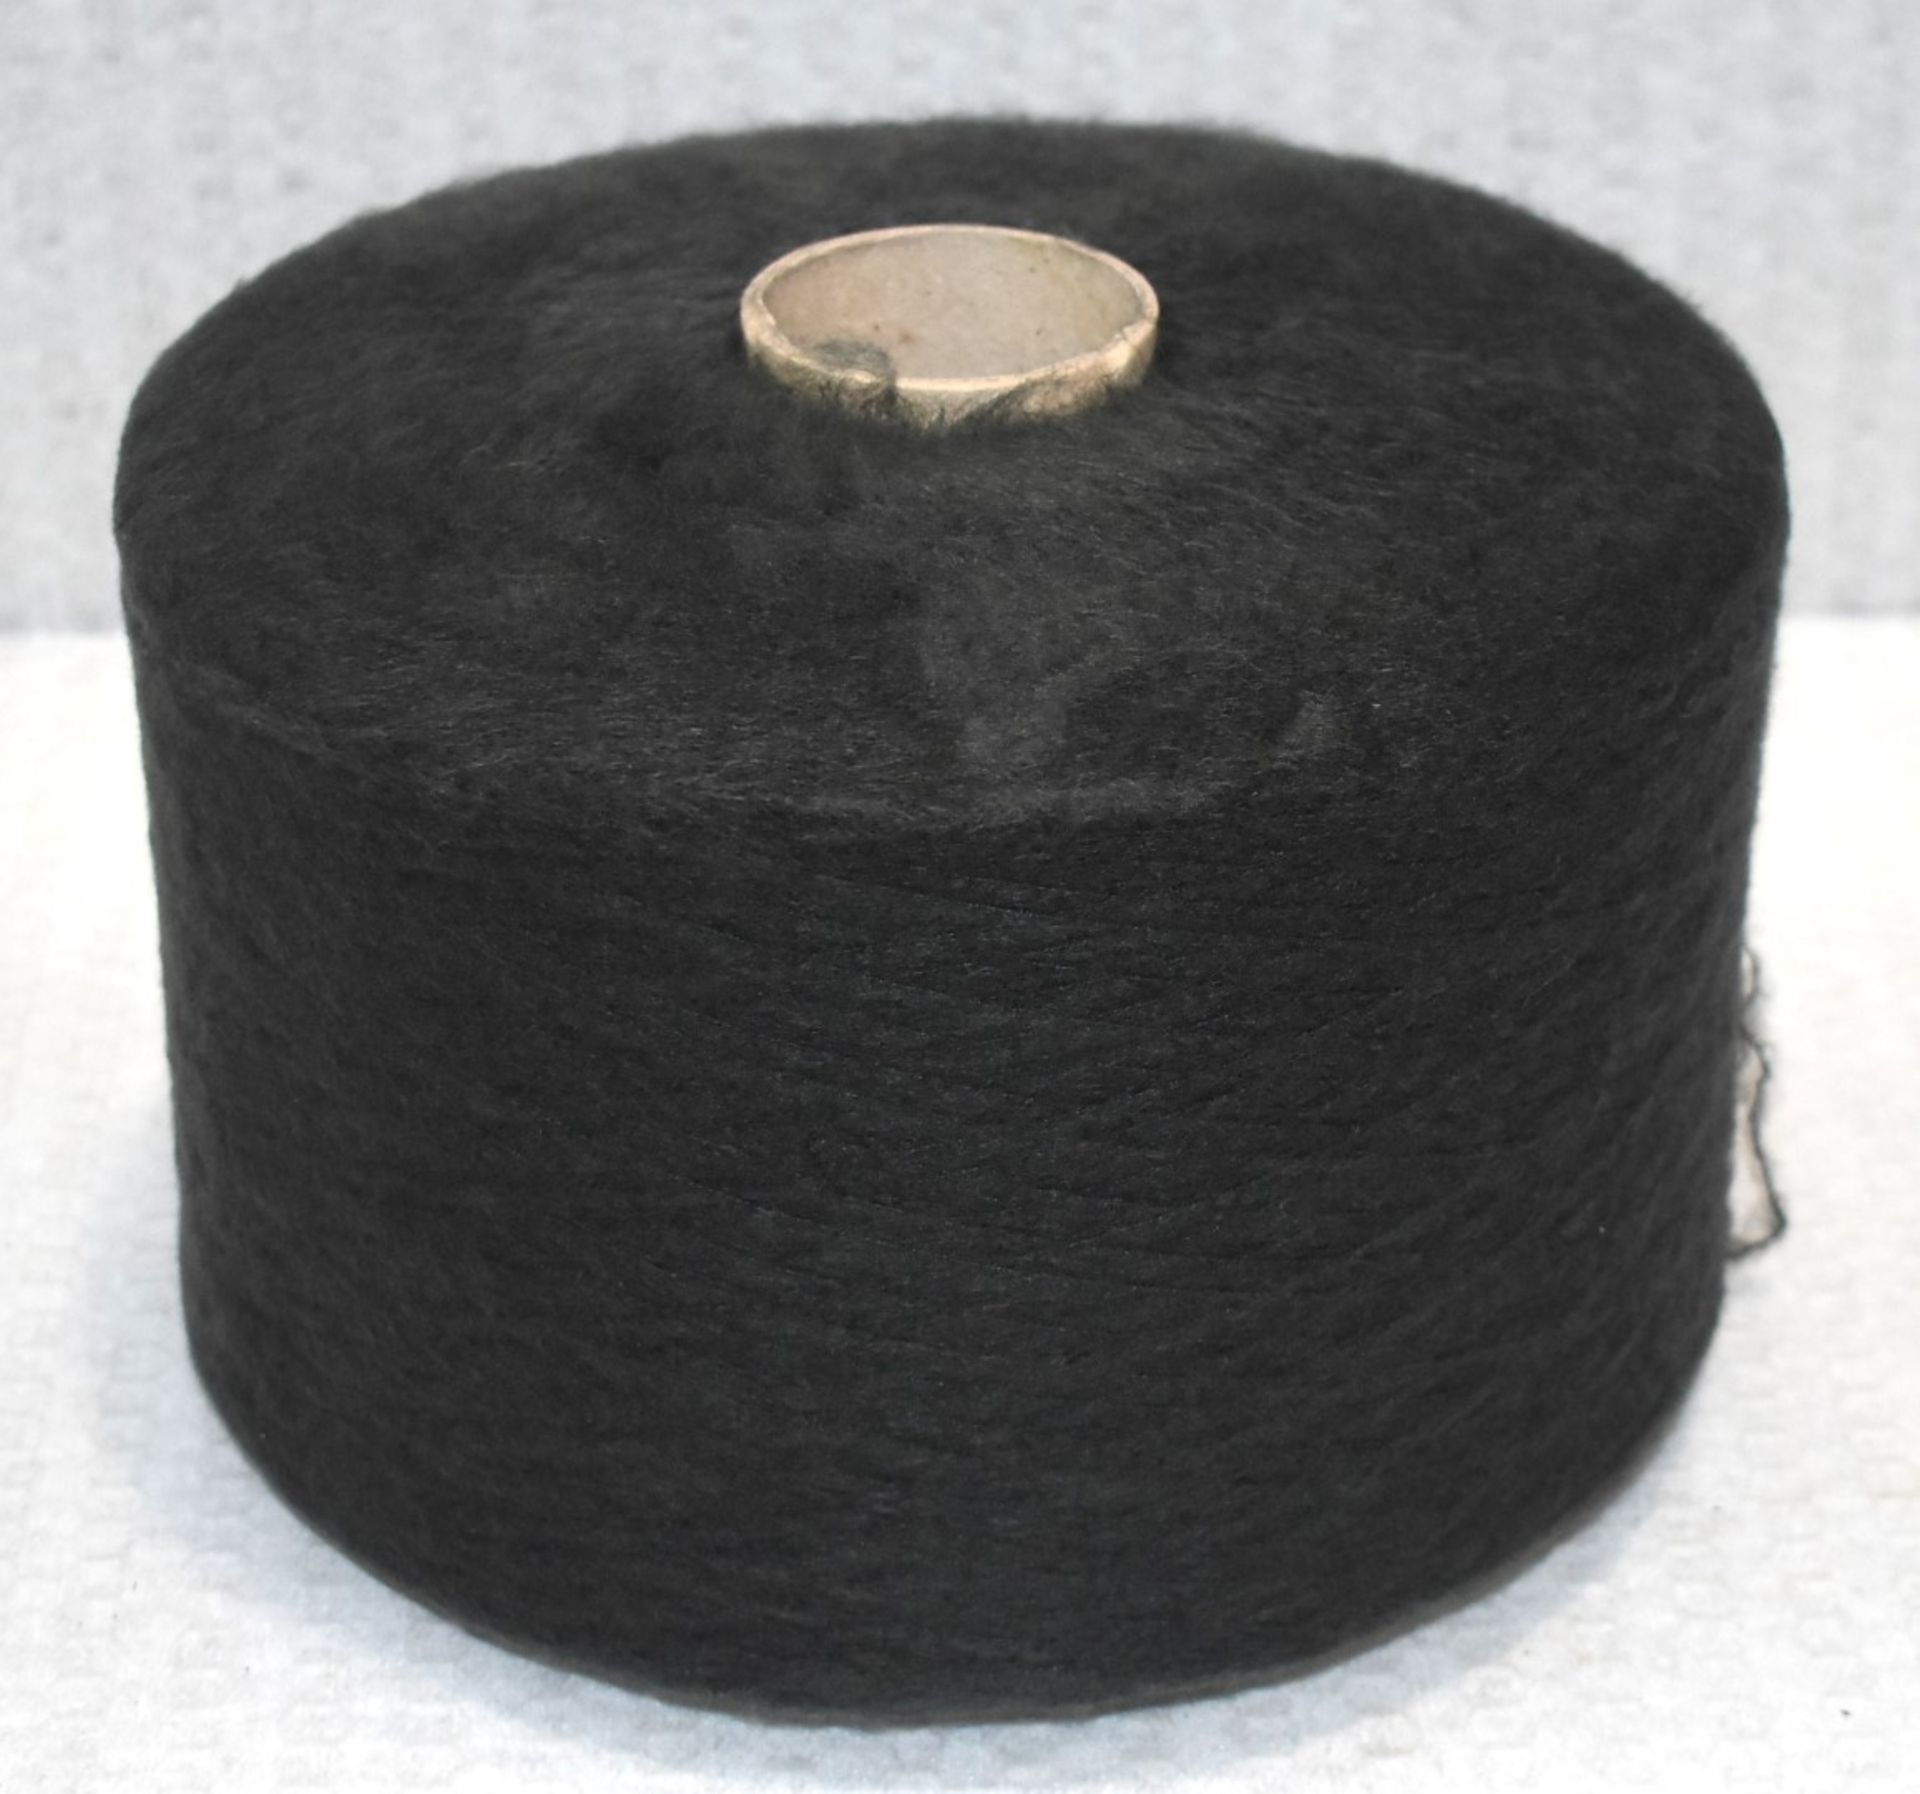 1 x Cone of 1/7,5 Lagona Knitting Yarn - Charcoal - Approx Weight: 2,300g - New Stock ABL Yarn - Image 2 of 10